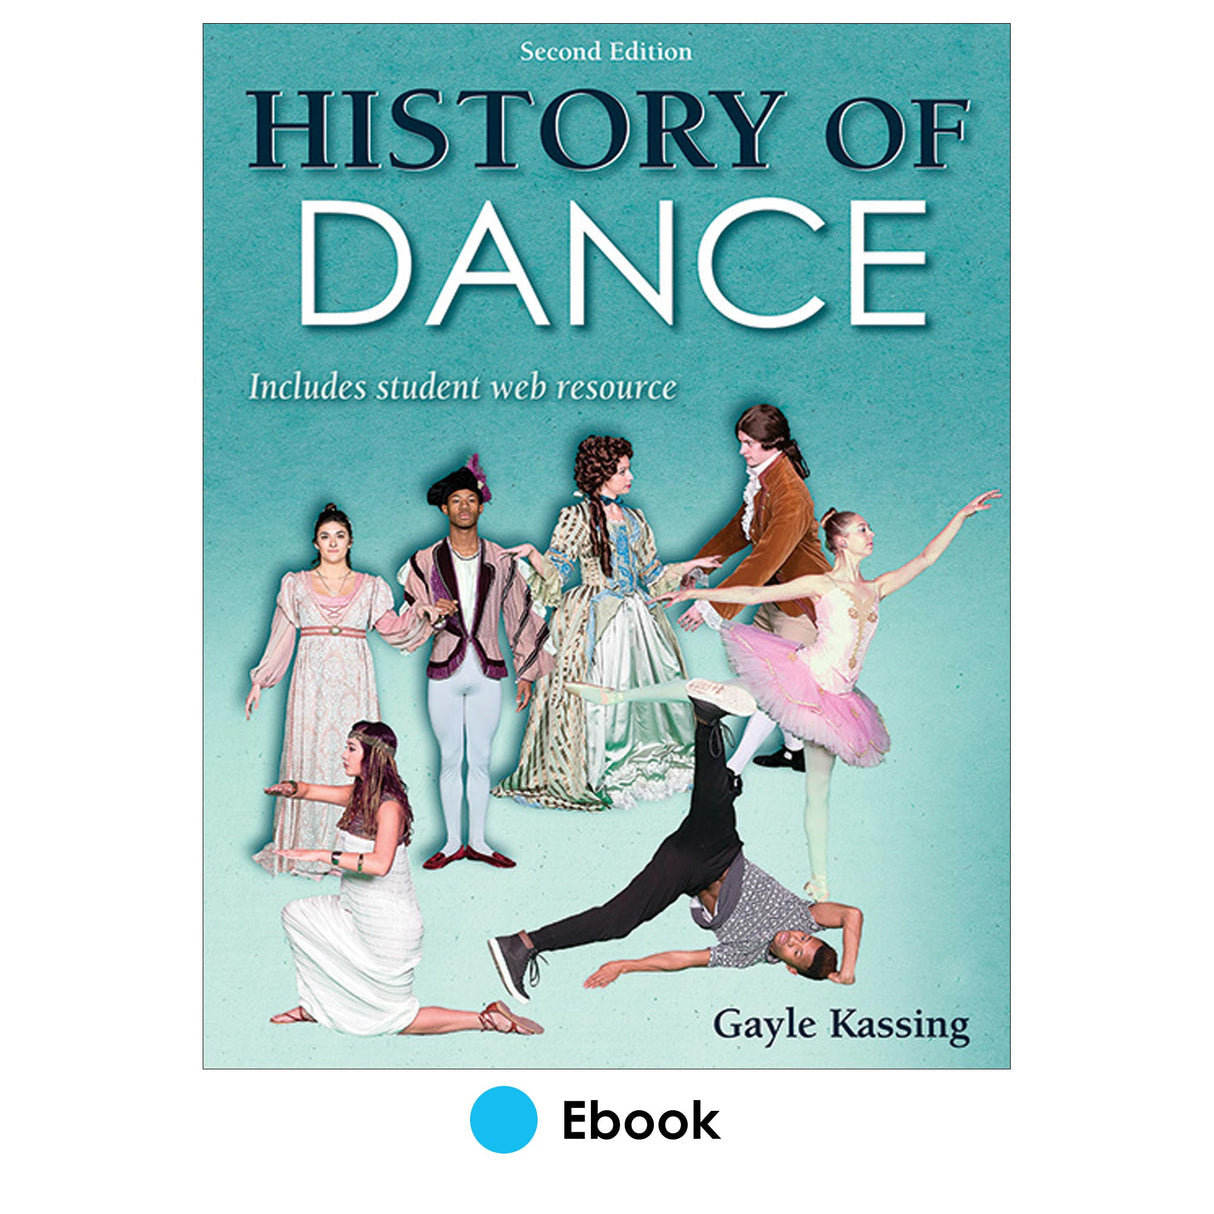 History of Dance 2nd Edition PDF With Web Resource